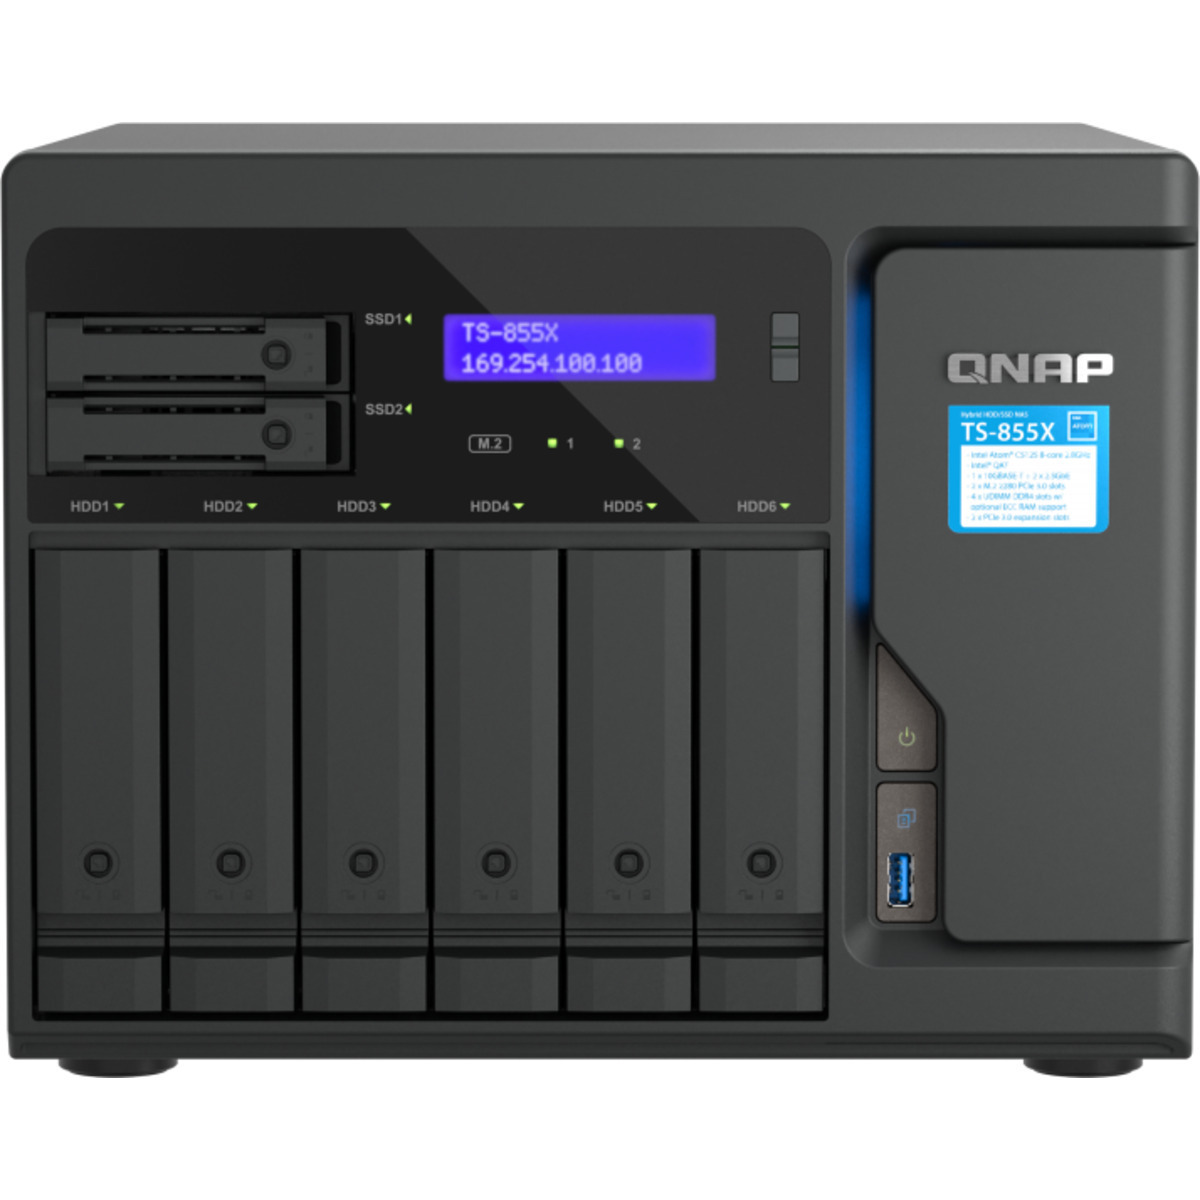 QNAP TS-855X 30tb 6+2-Bay Desktop Multimedia / Power User / Business NAS - Network Attached Storage Device 3x10tb Seagate IronWolf Pro ST10000NT001 3.5 7200rpm SATA 6Gb/s HDD NAS Class Drives Installed - Burn-In Tested - ON SALE - FREE RAM UPGRADE TS-855X